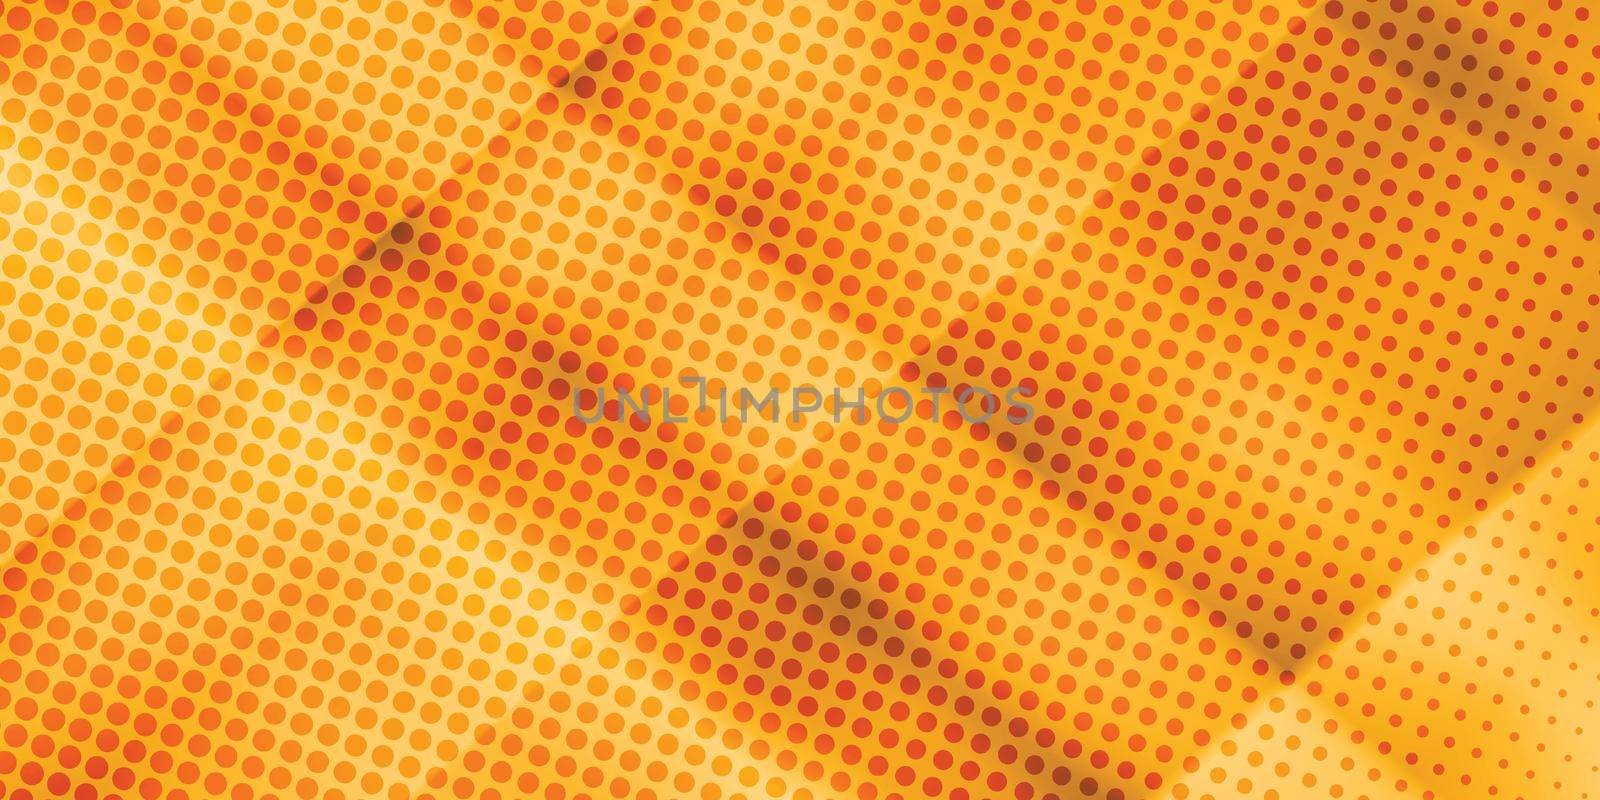 90-s style. Creative illustration in halftone style with orange gradient. Abstract colorful geometric background. Pattern for wallpaper, web page, textures by allaku